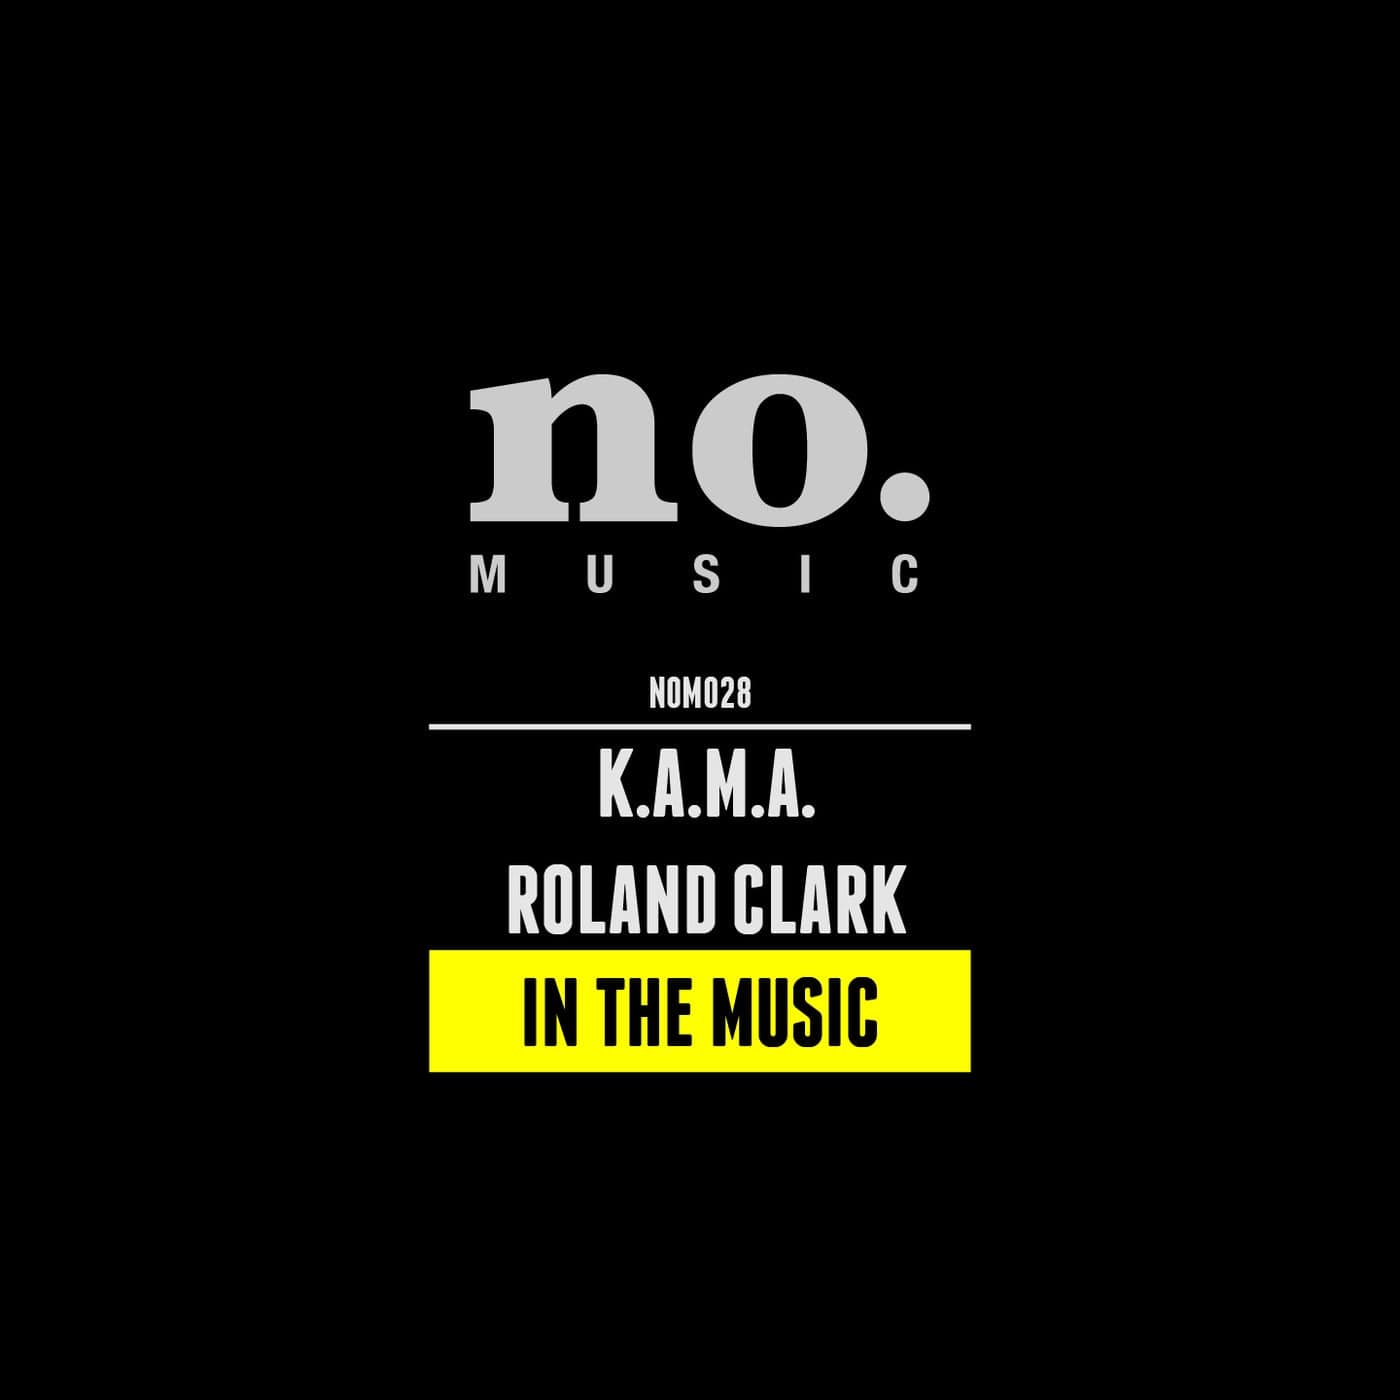 image cover: Roland Clark, K.A.M.A. - In The Music / NOM028